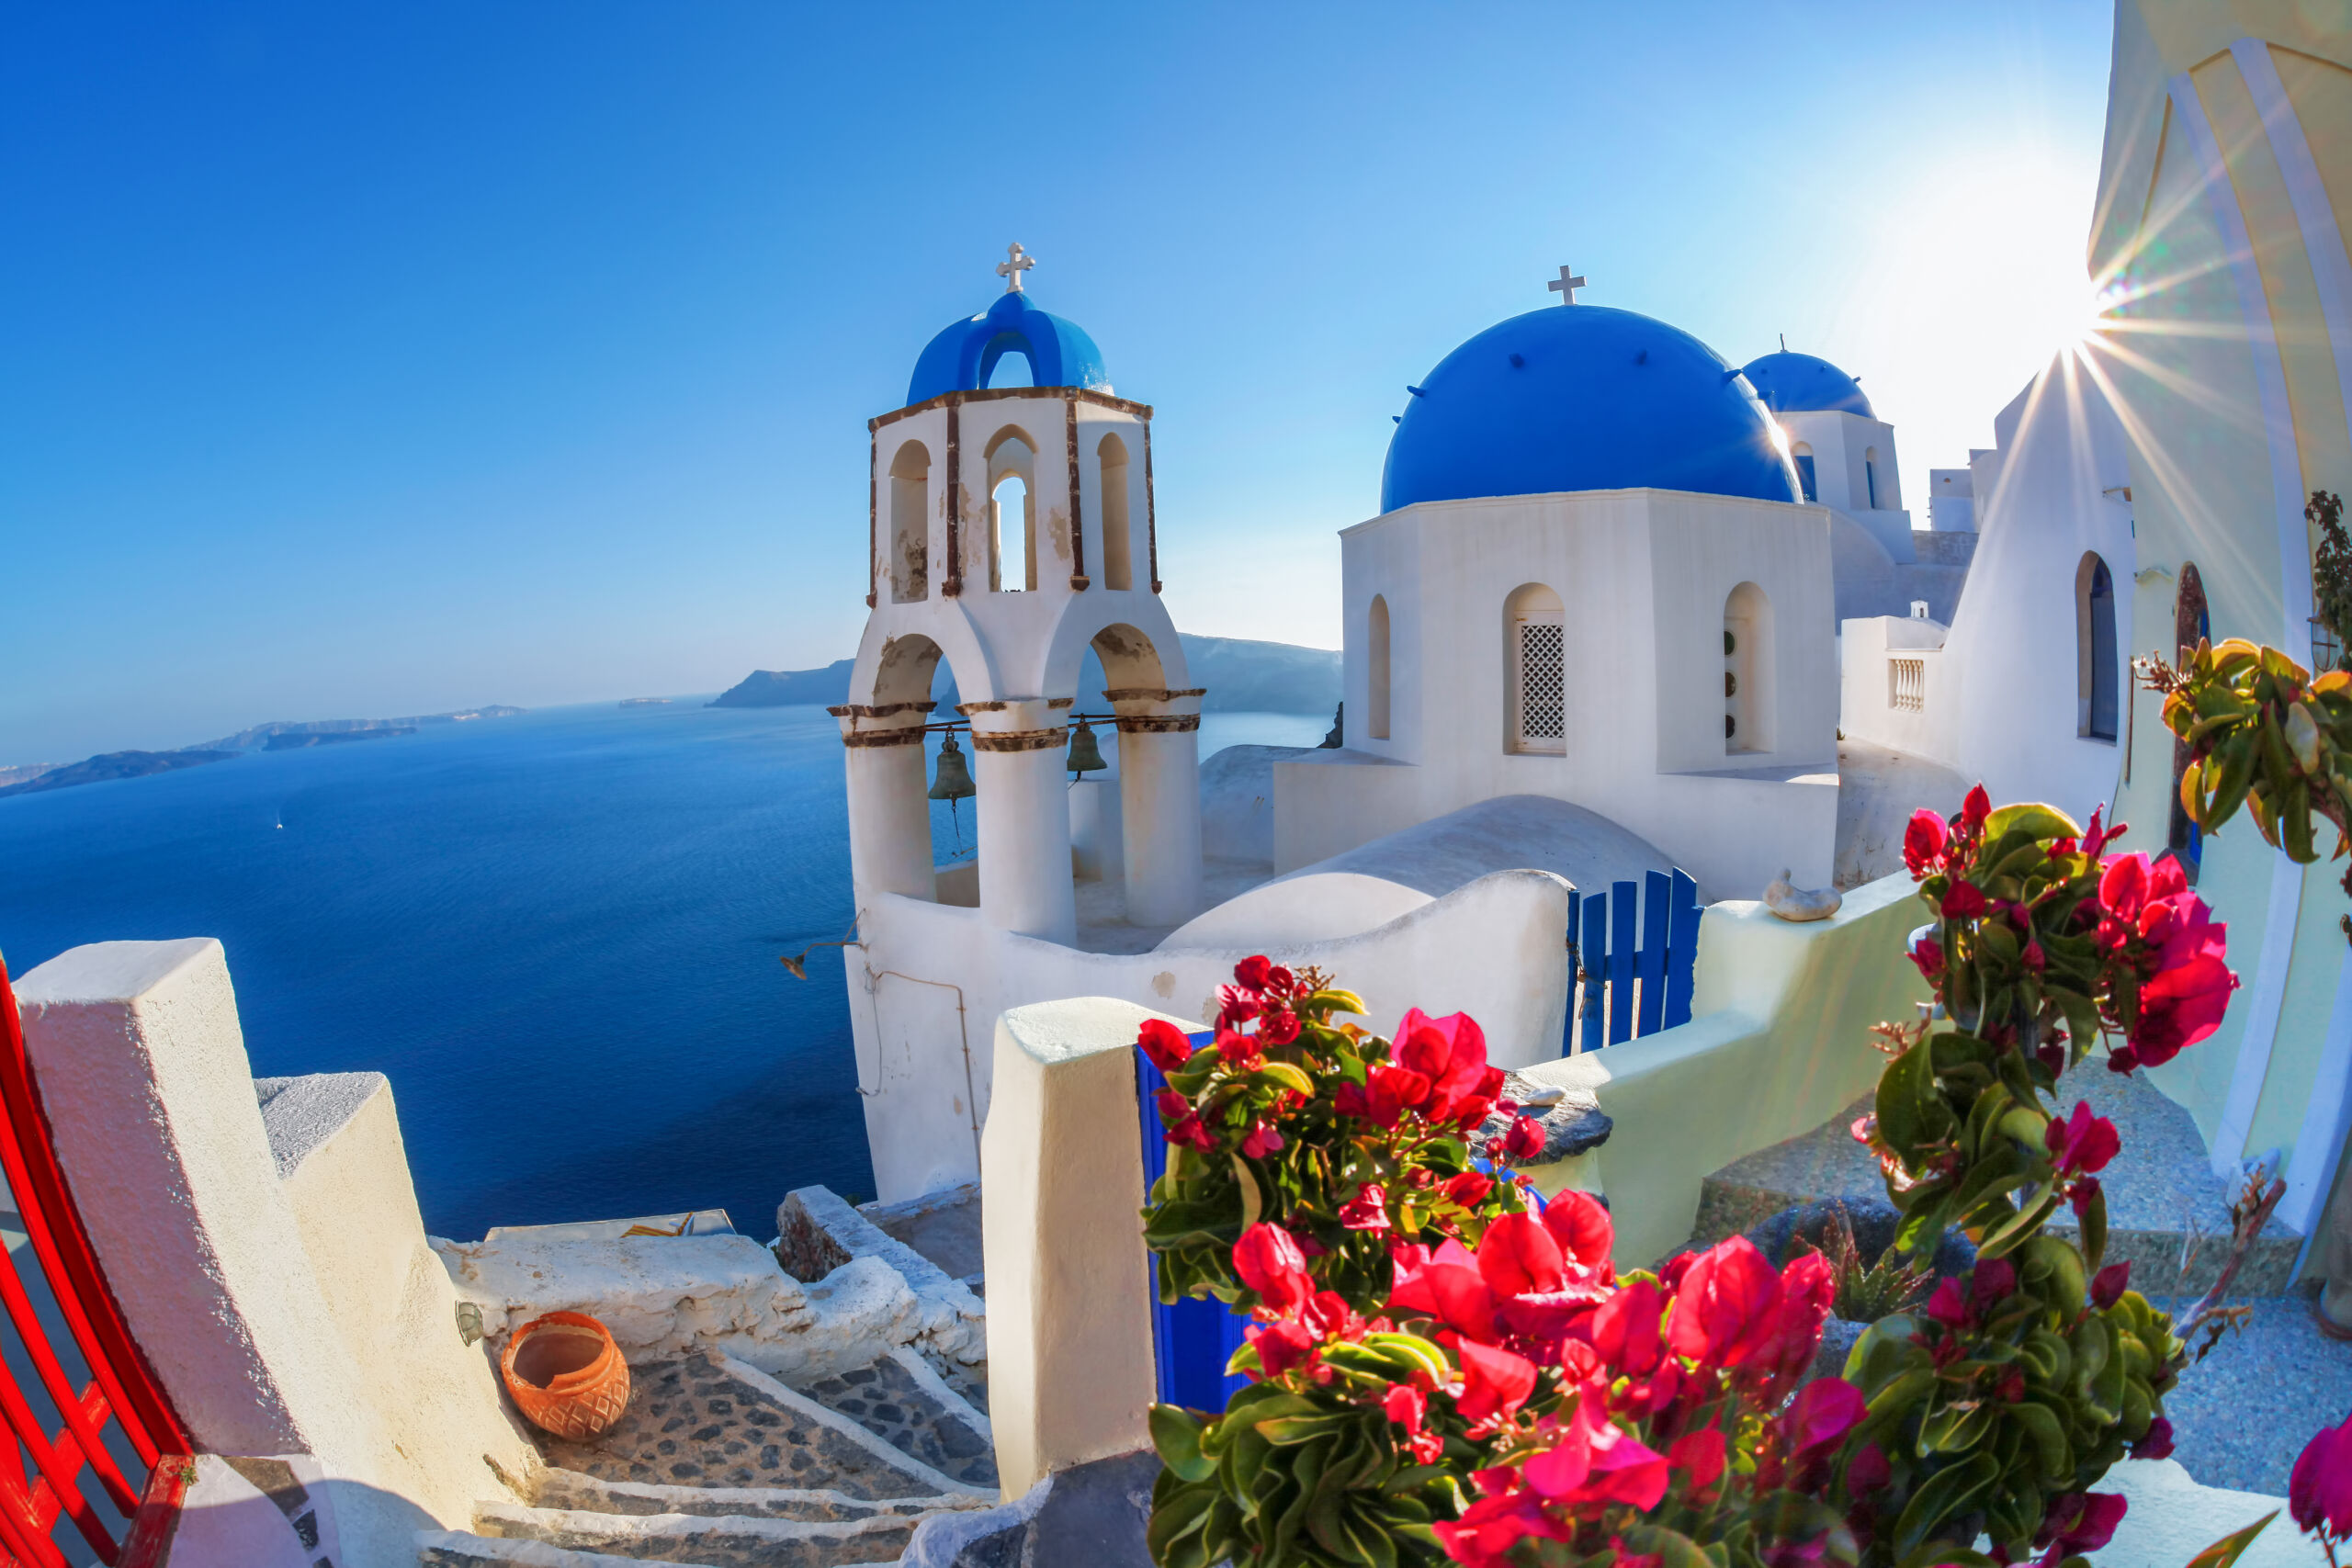 How to best visit Santorini with mobility issues